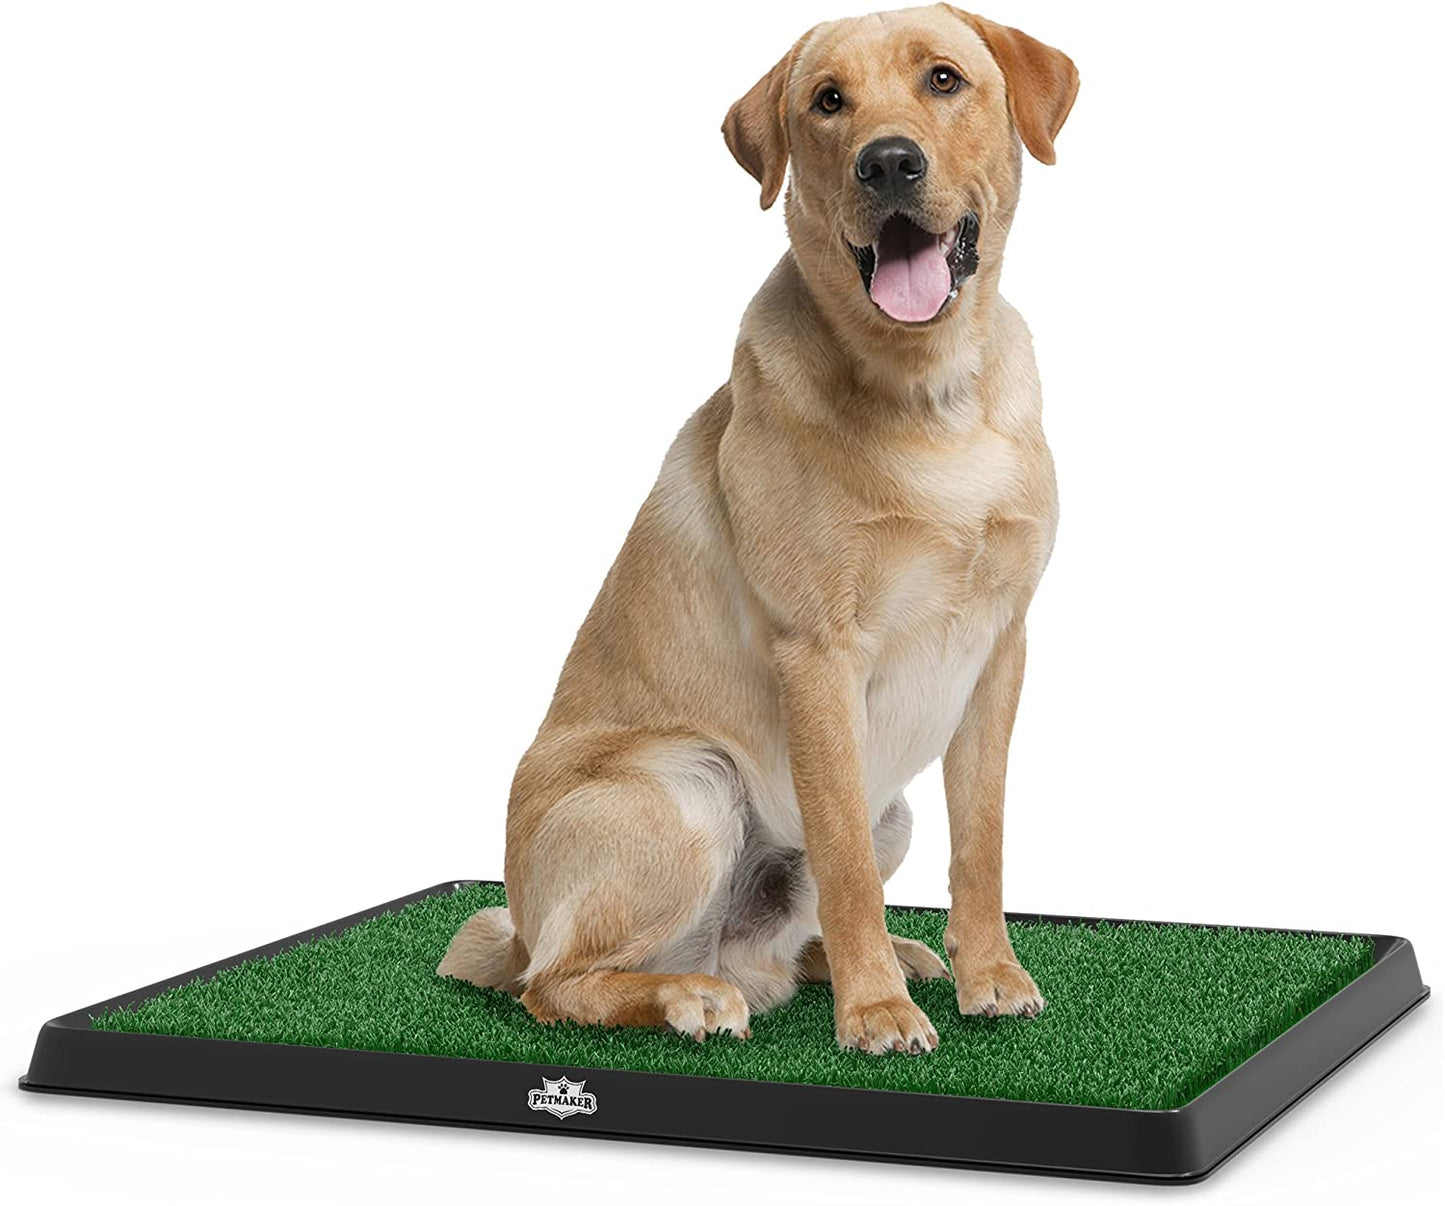 Artificial Grass Puppy Pee Pad for Dogs and Small Pets